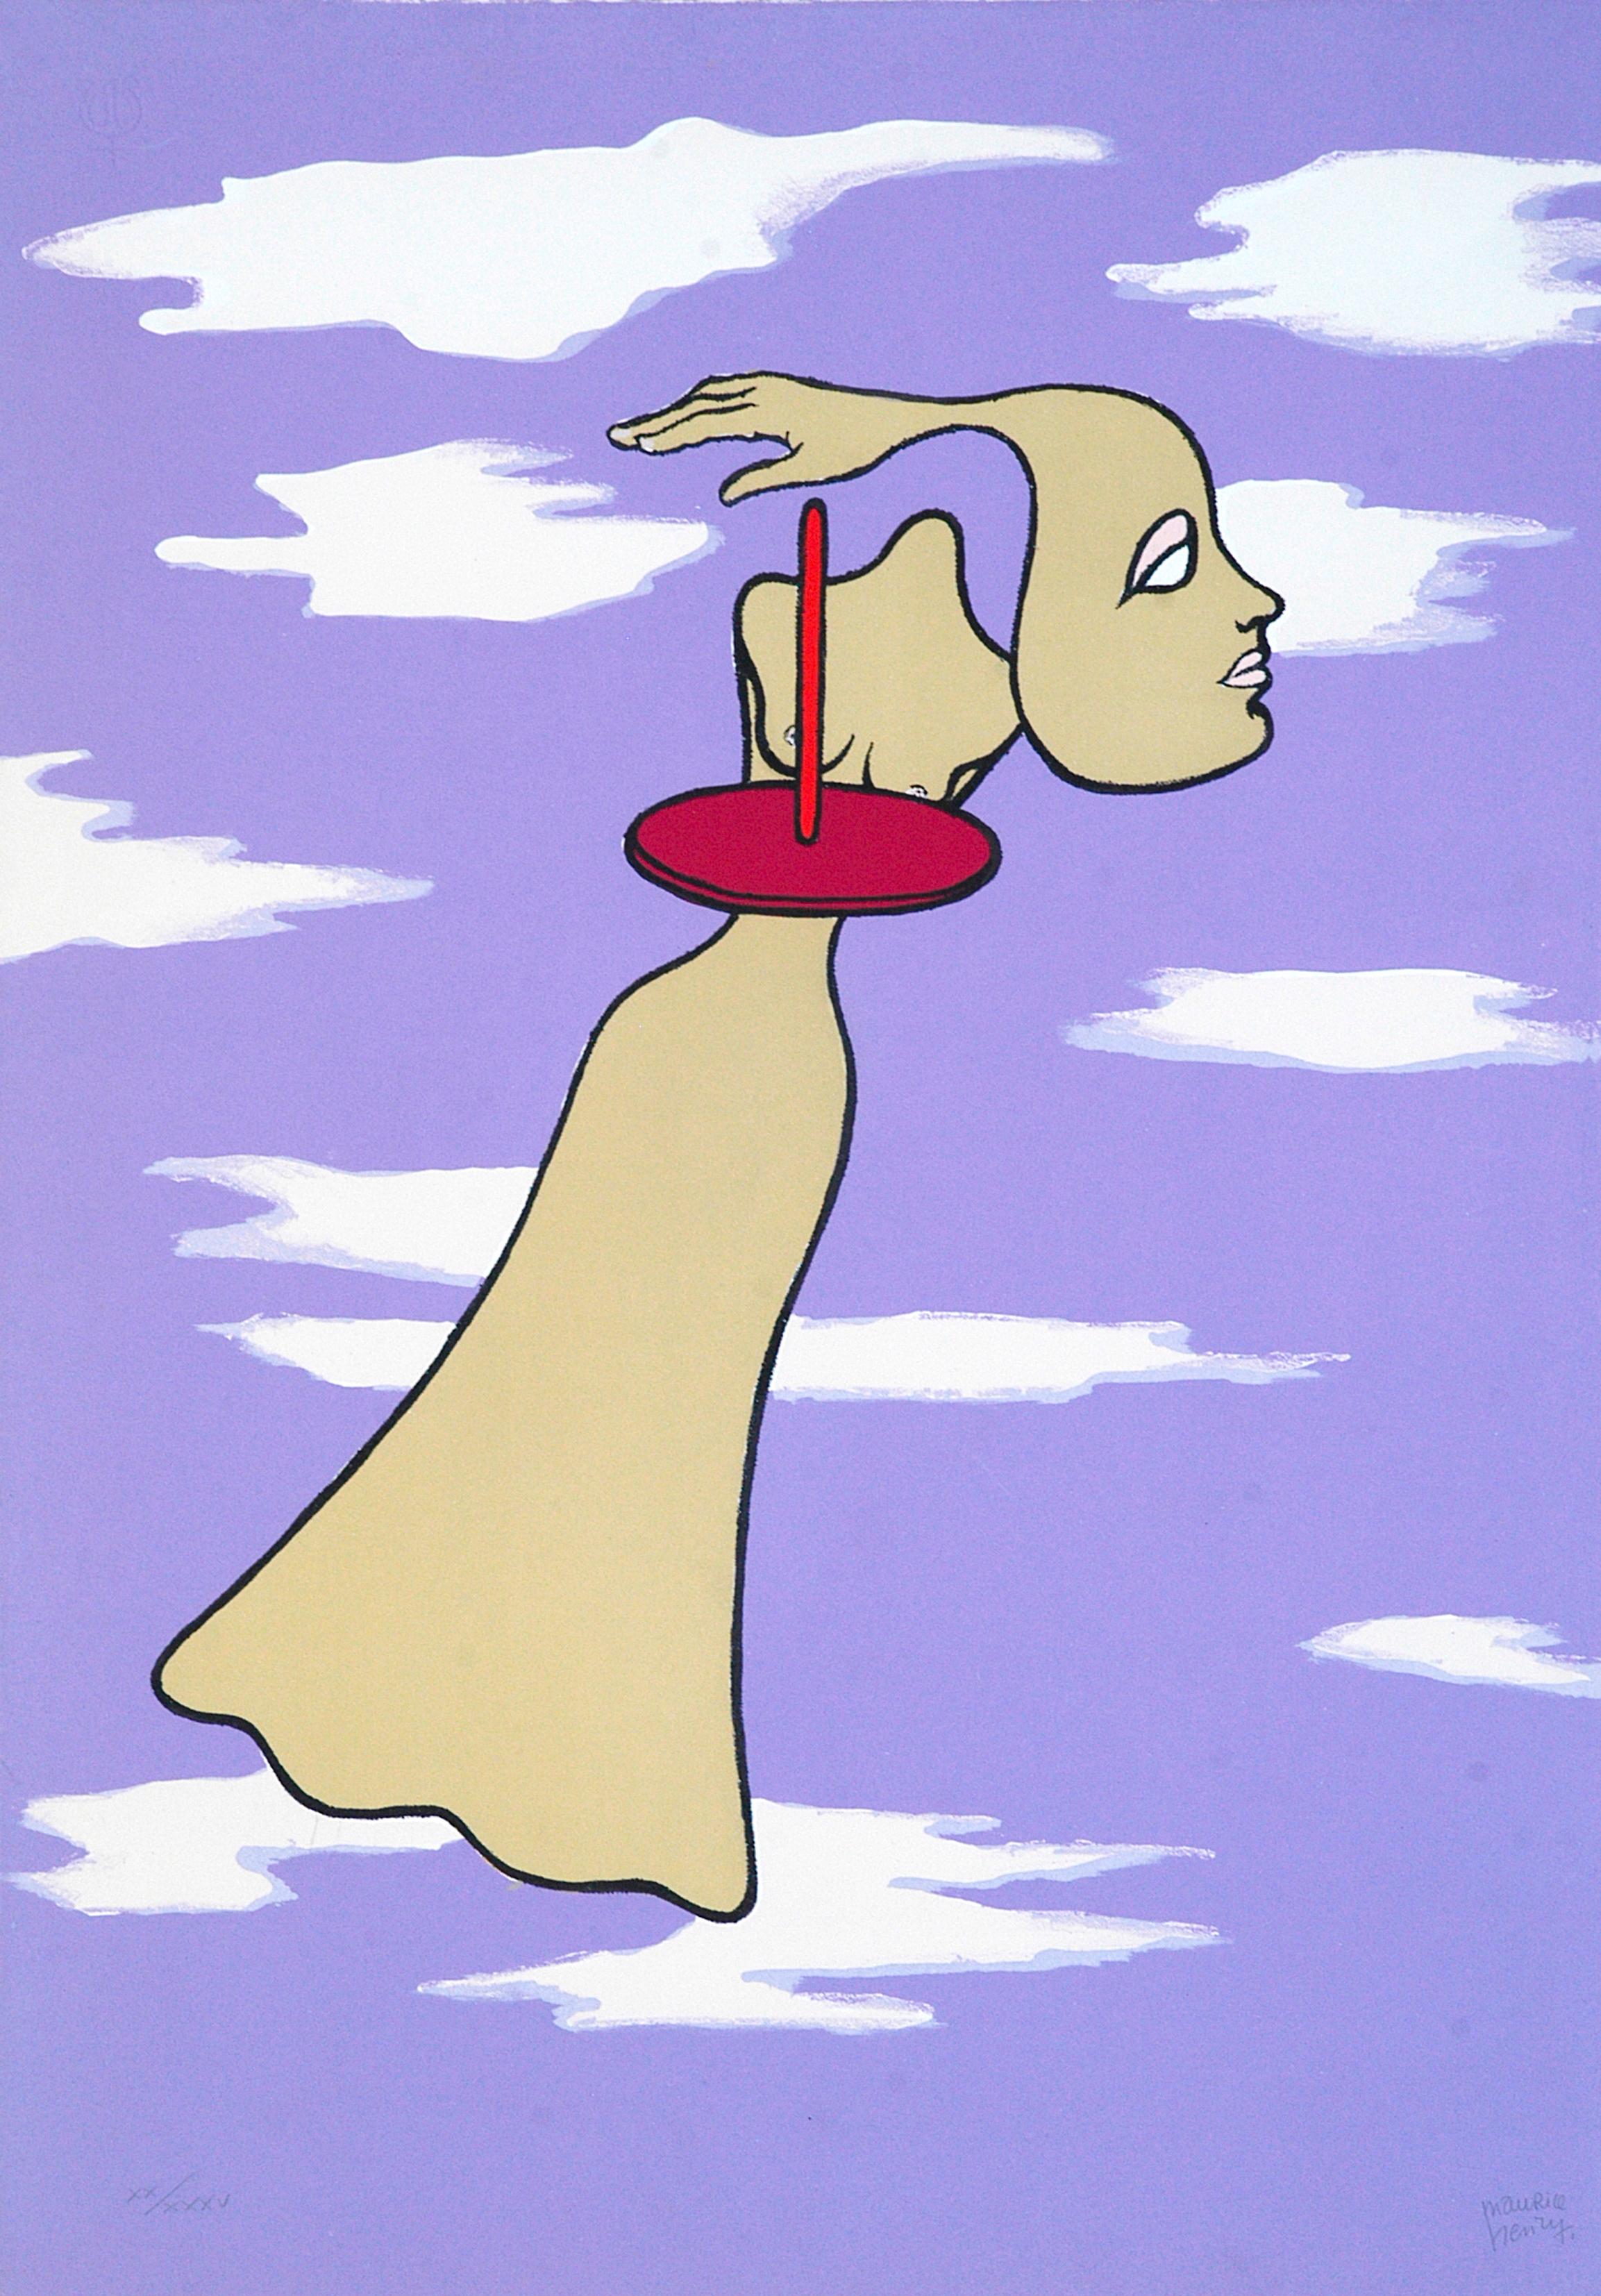 Woman in Clouds - Lithograph by M. Henry - 1971